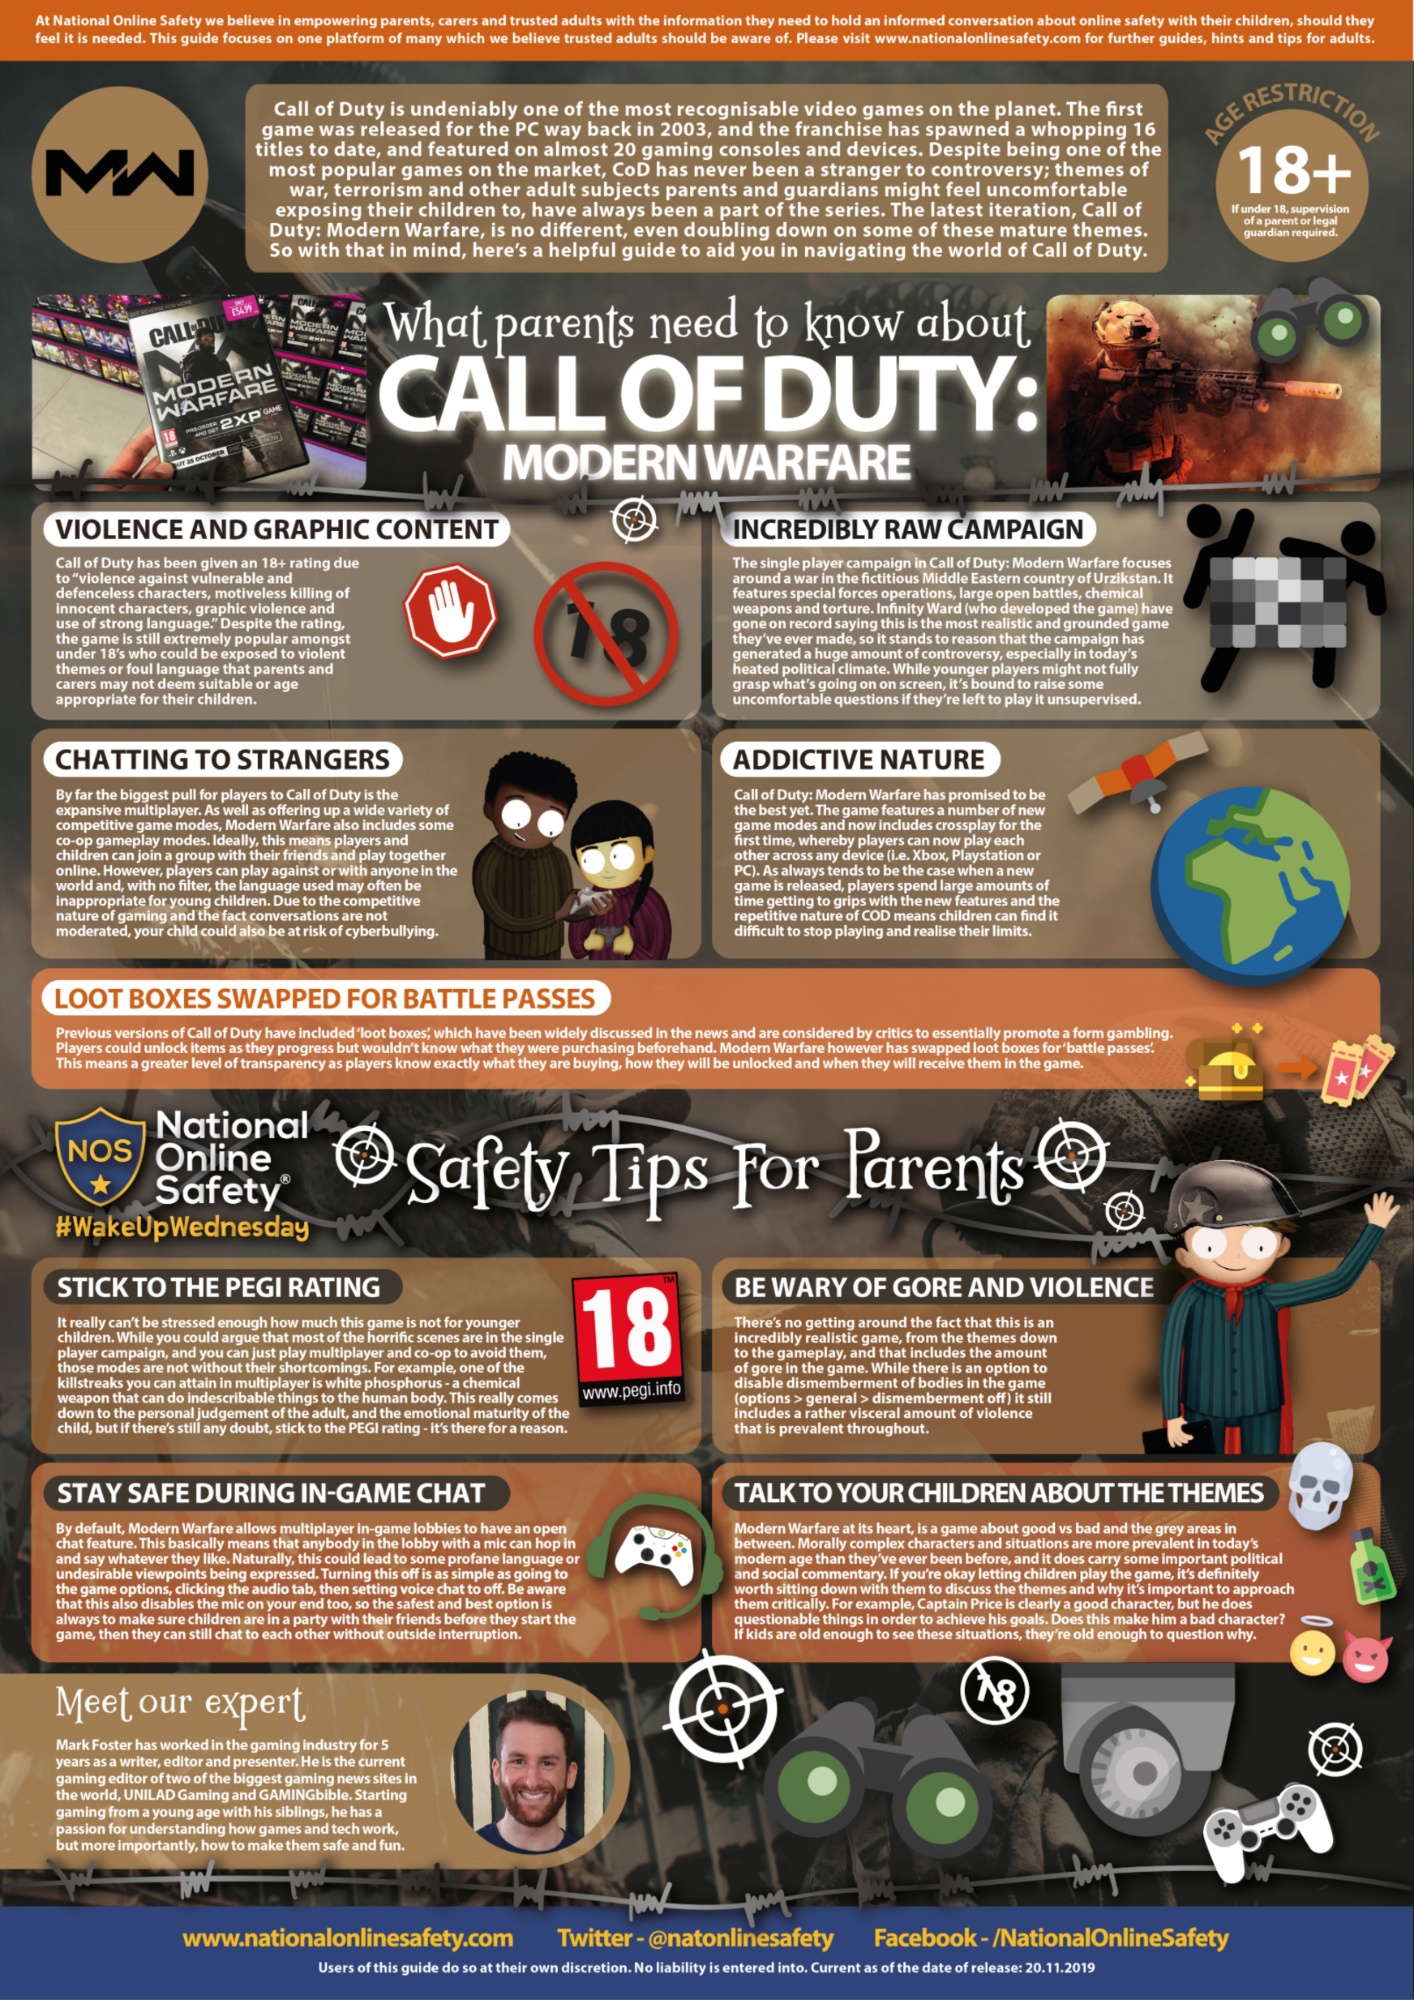 A parents guide to Call of Duty: Warzone